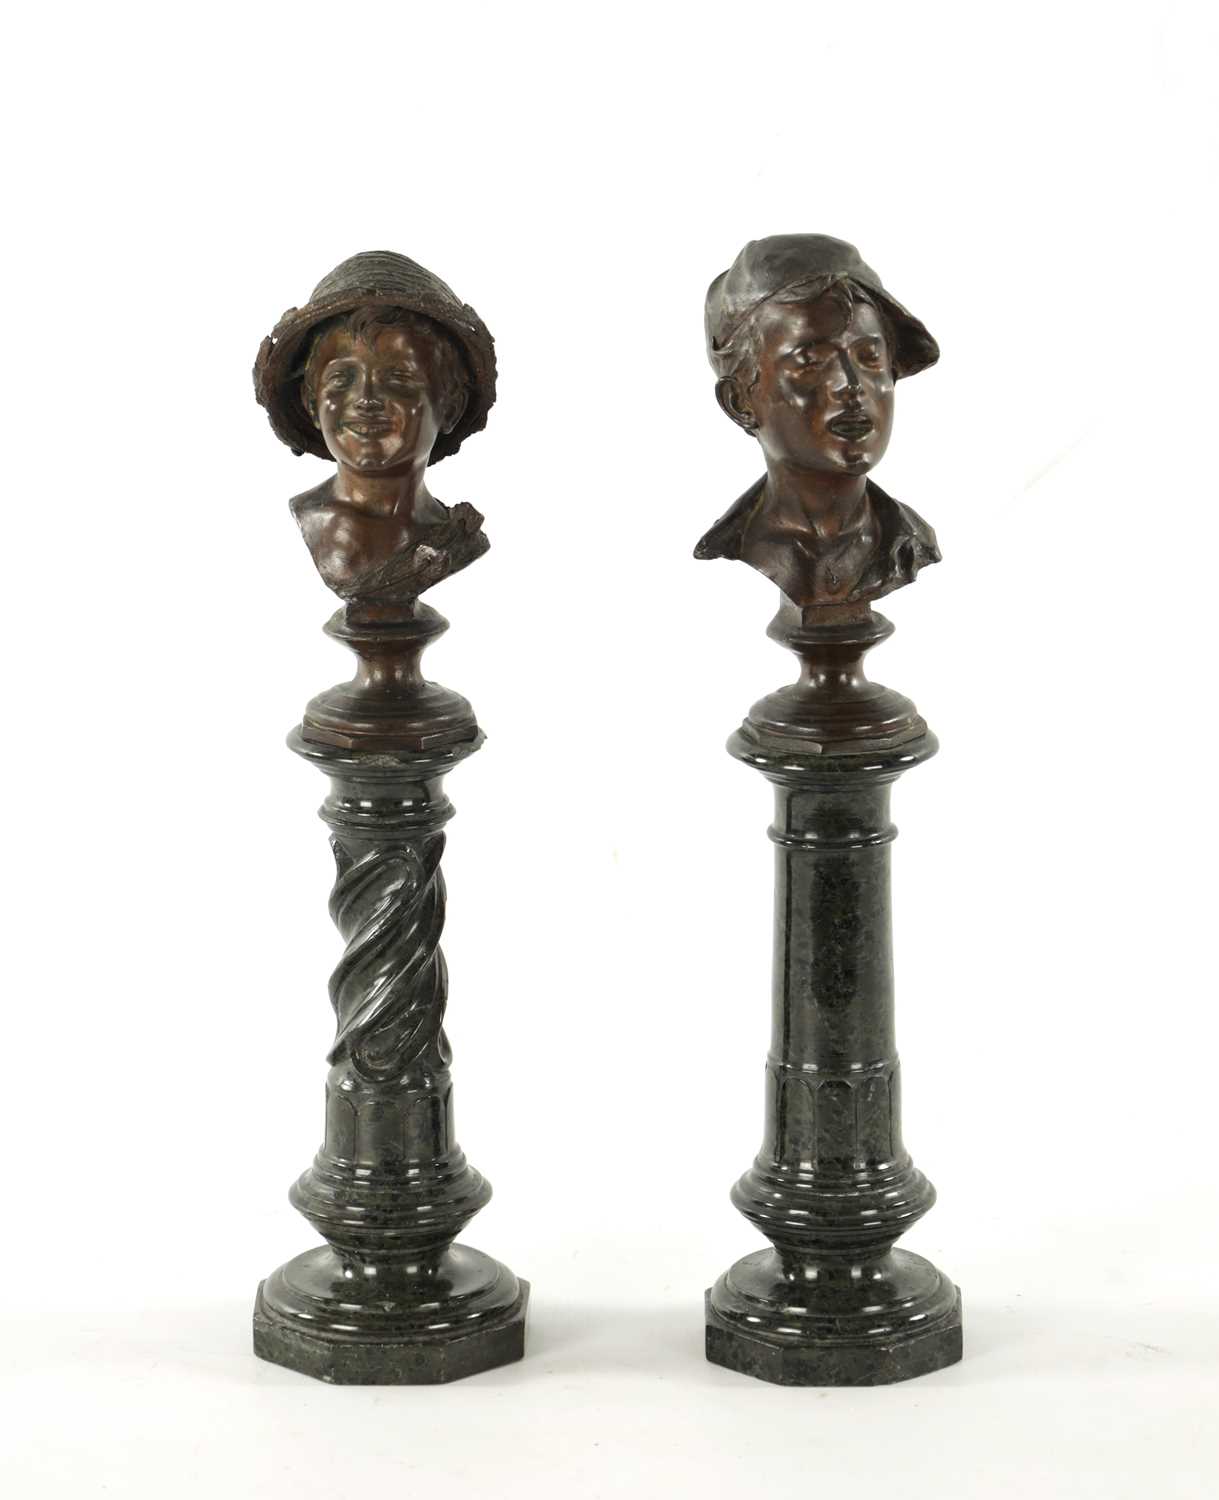 A MATCHED PAIR OF LATE 19TH CENTURY BRONZE MINIATURE BUSTS